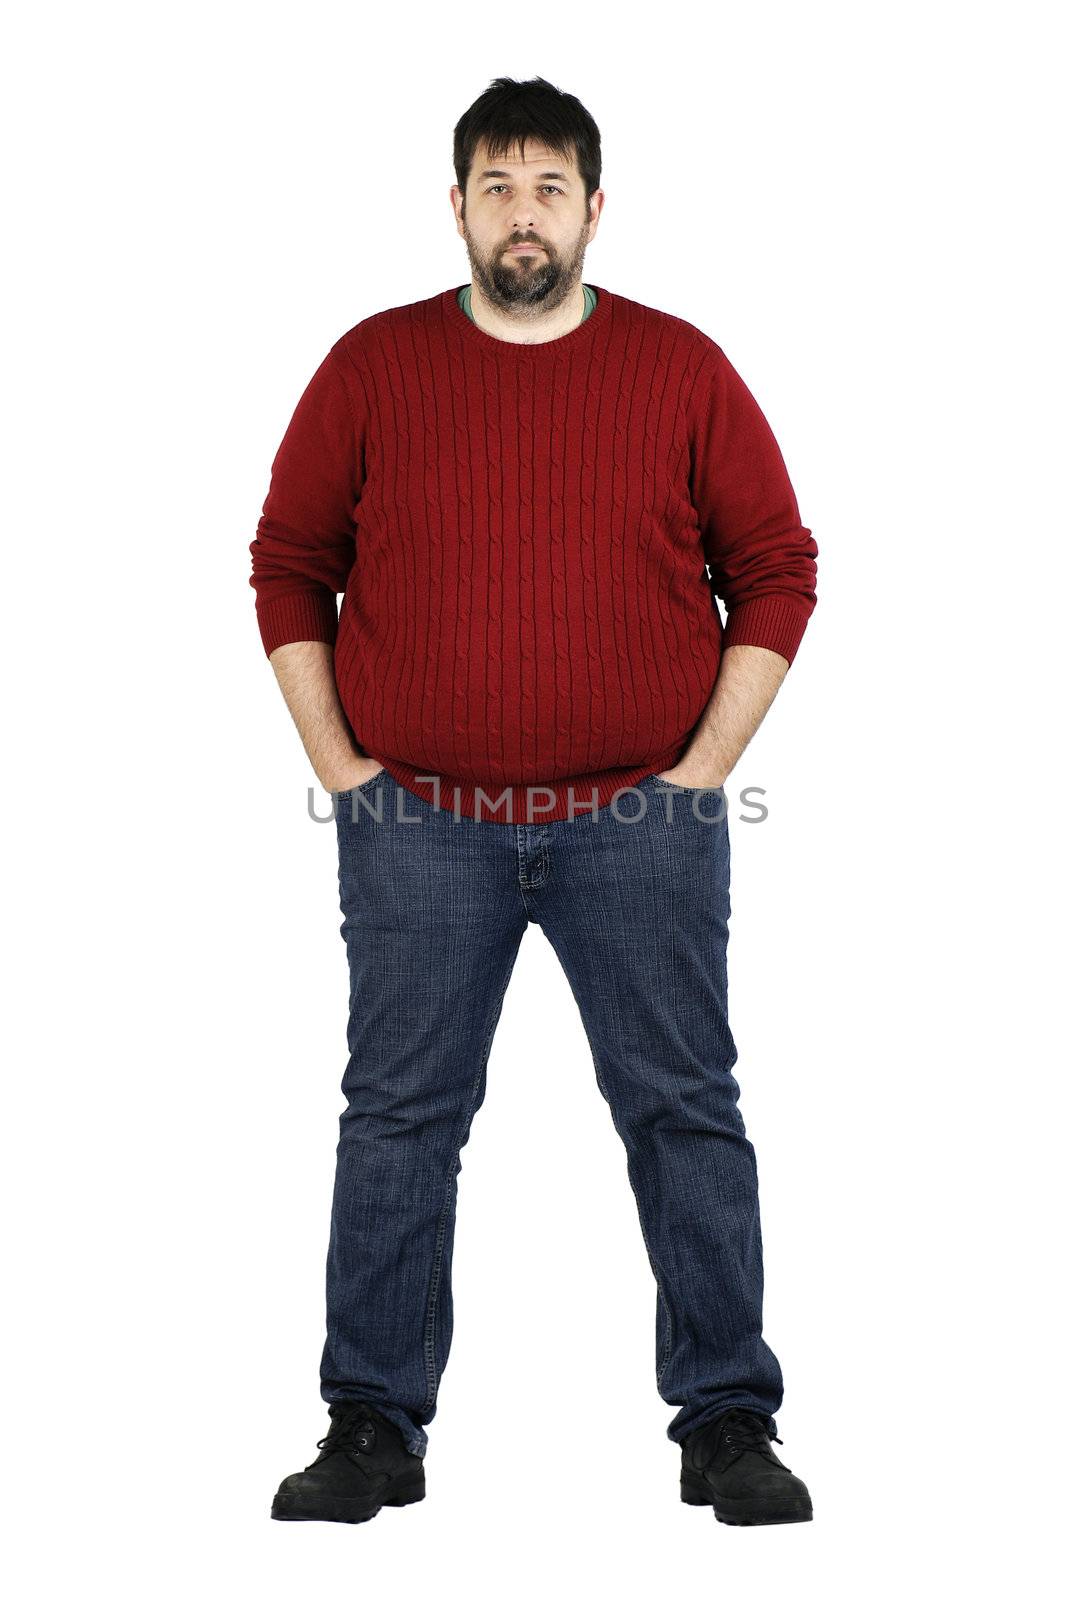 Complete body shot of a big guy smiling looking at camera, real ordinary middle age bearded white man with weight problem isolated over white